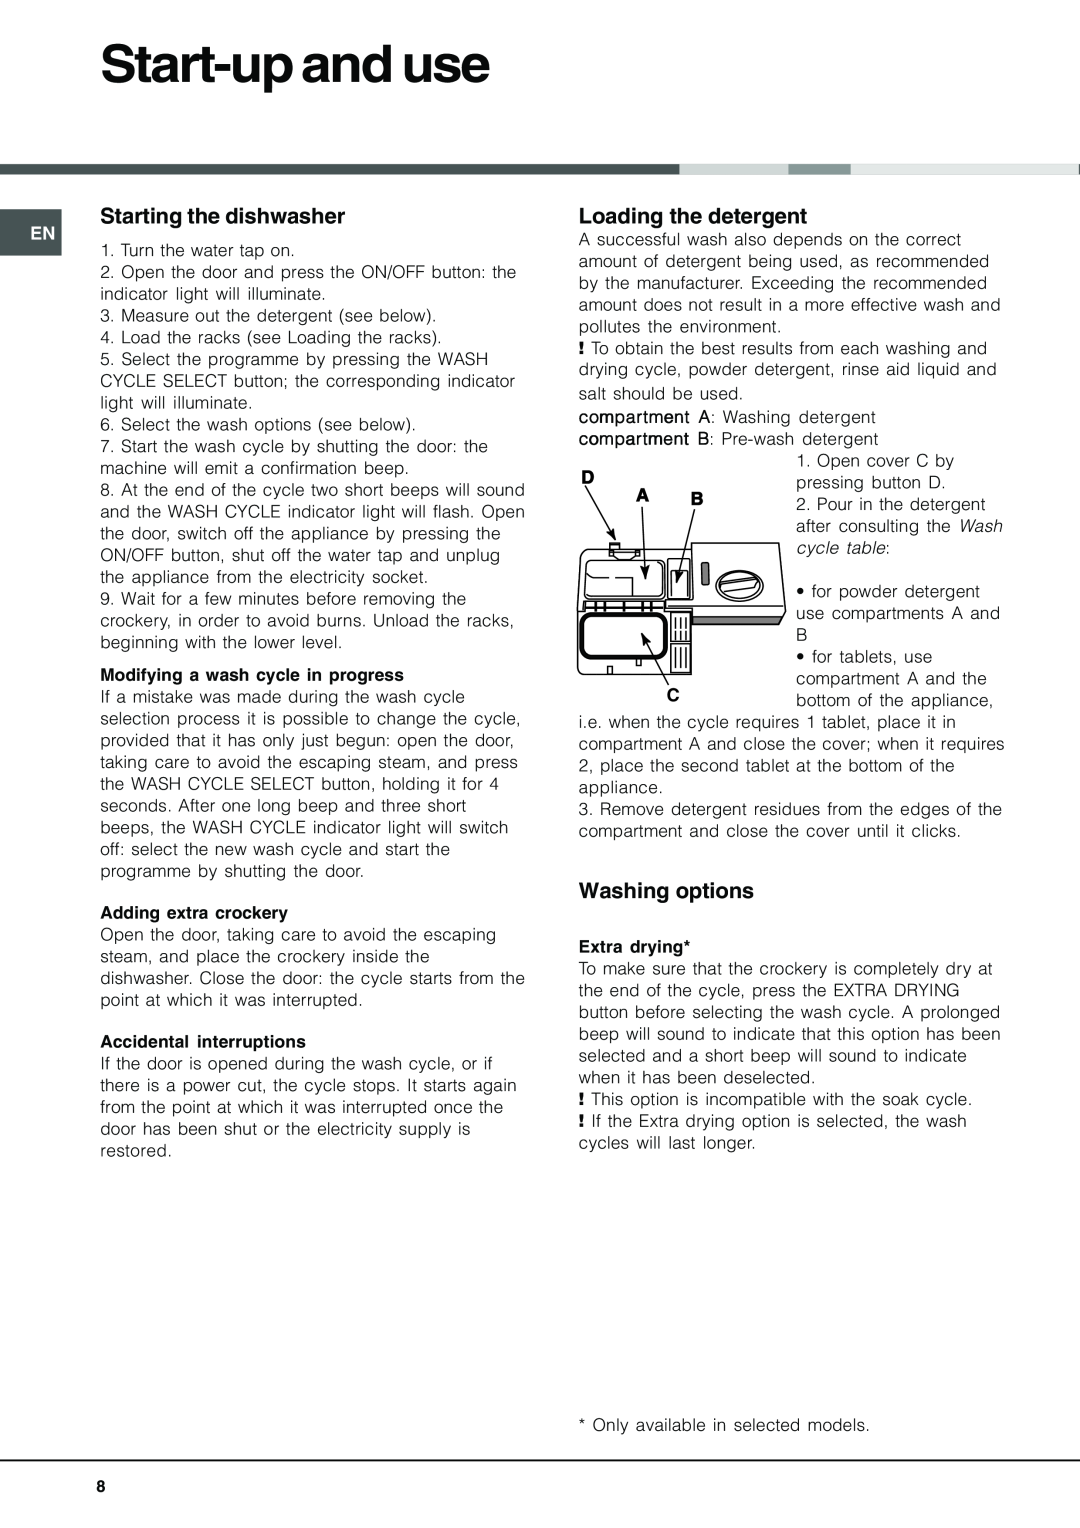 Hotpoint BFI 670 manual Start-upand use, Starting the dishwasher, Loading the detergent, Washing options, cycle table 